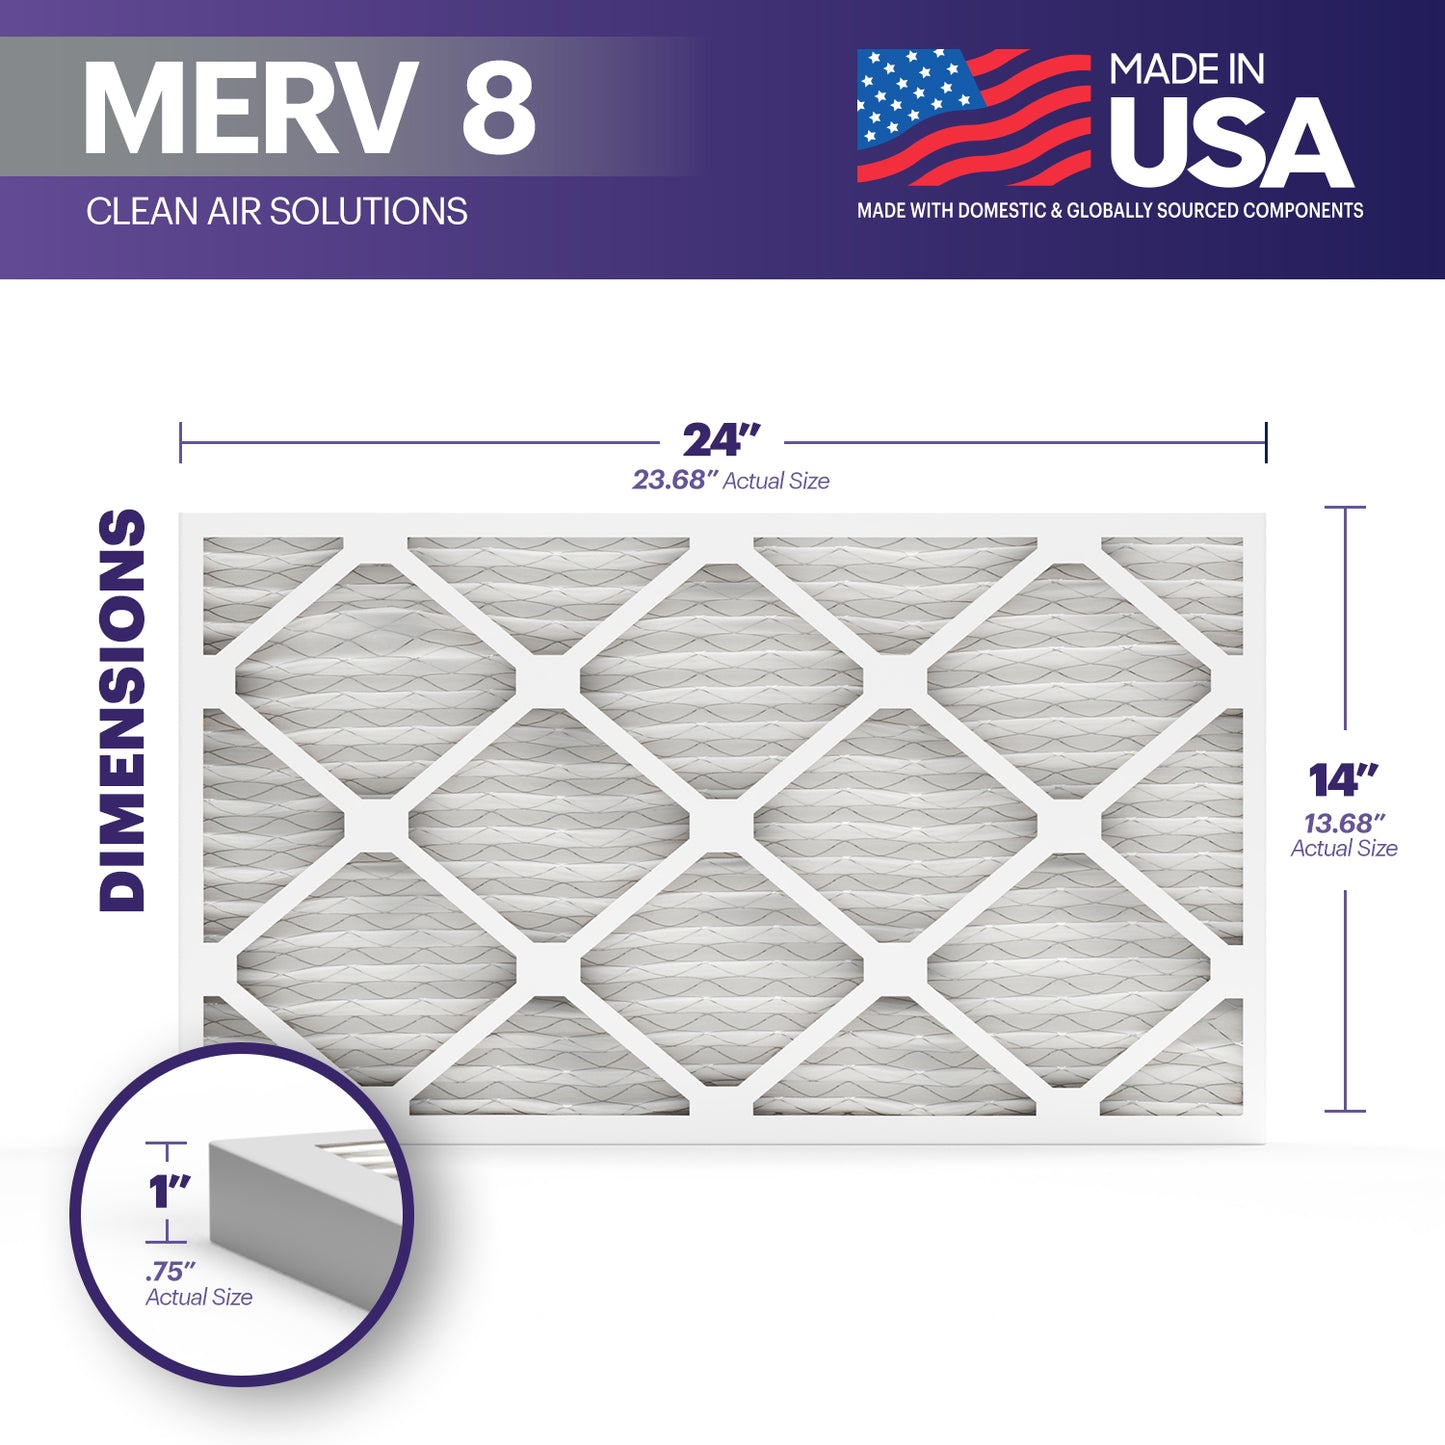 BNX TruFilter 14x24x1 MERV 8 Pleated Air Filter – Made in USA (6-Pack)